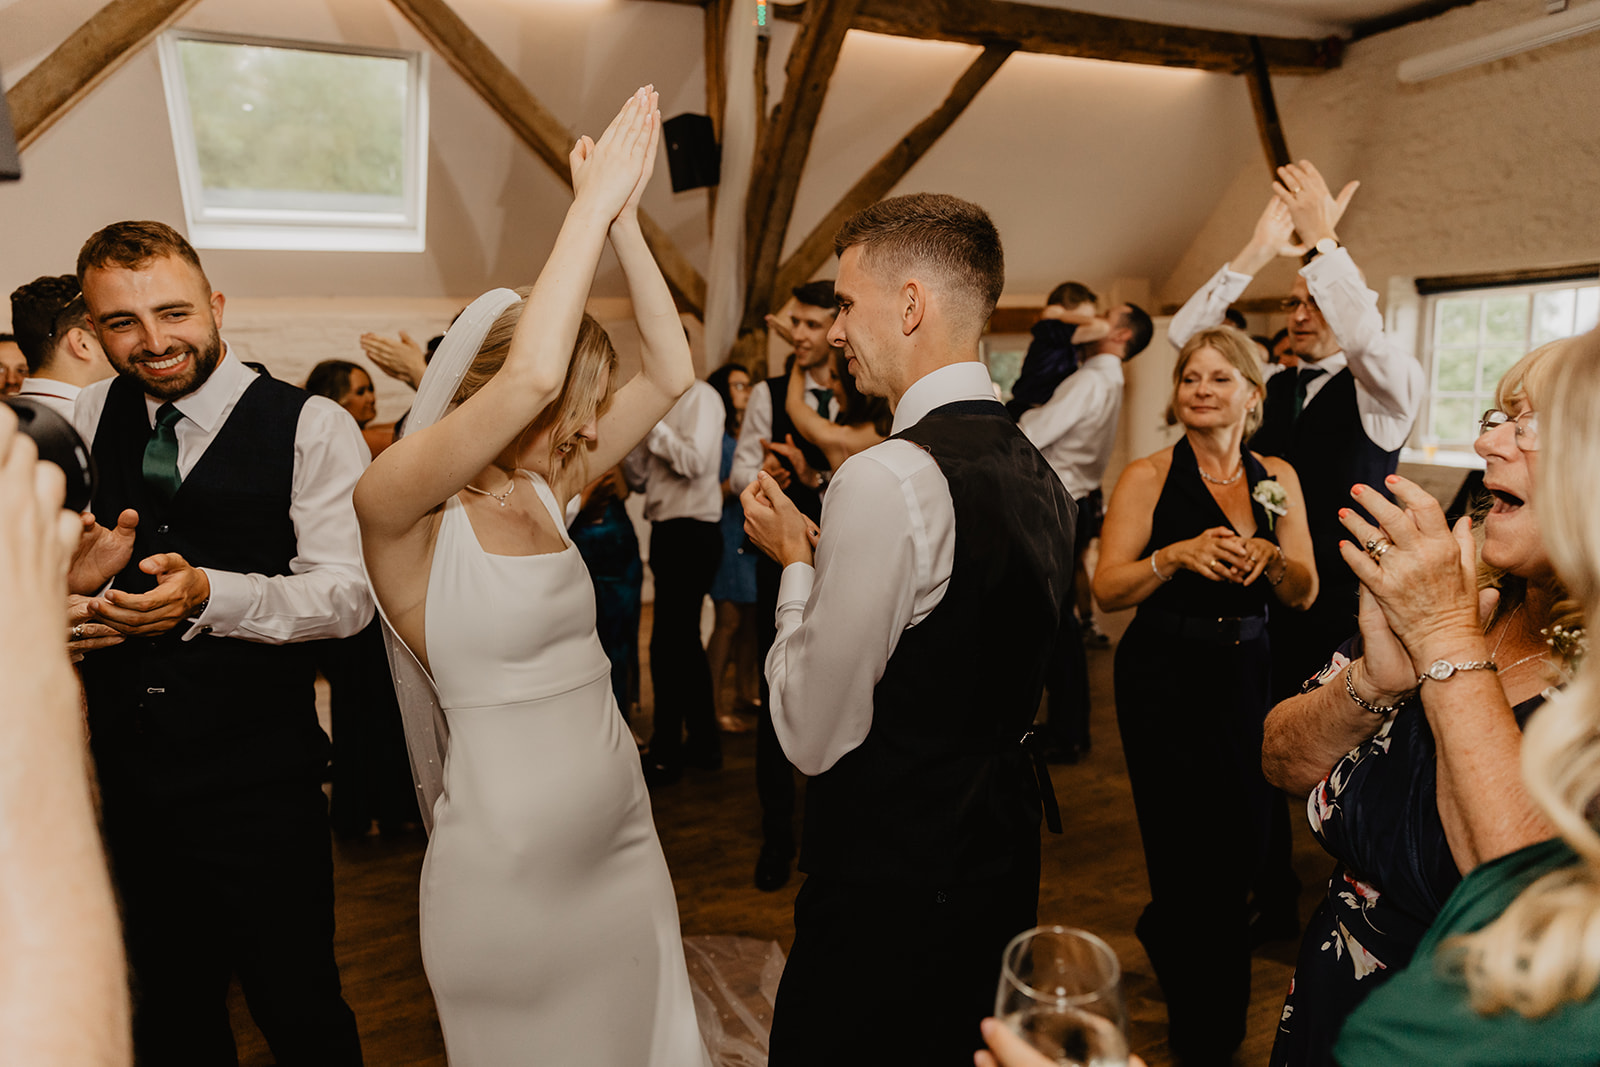 Bride and Groom first dance at a Bury Manor Barn Wedding in Sussex. Photographer OliveJoy Photography.